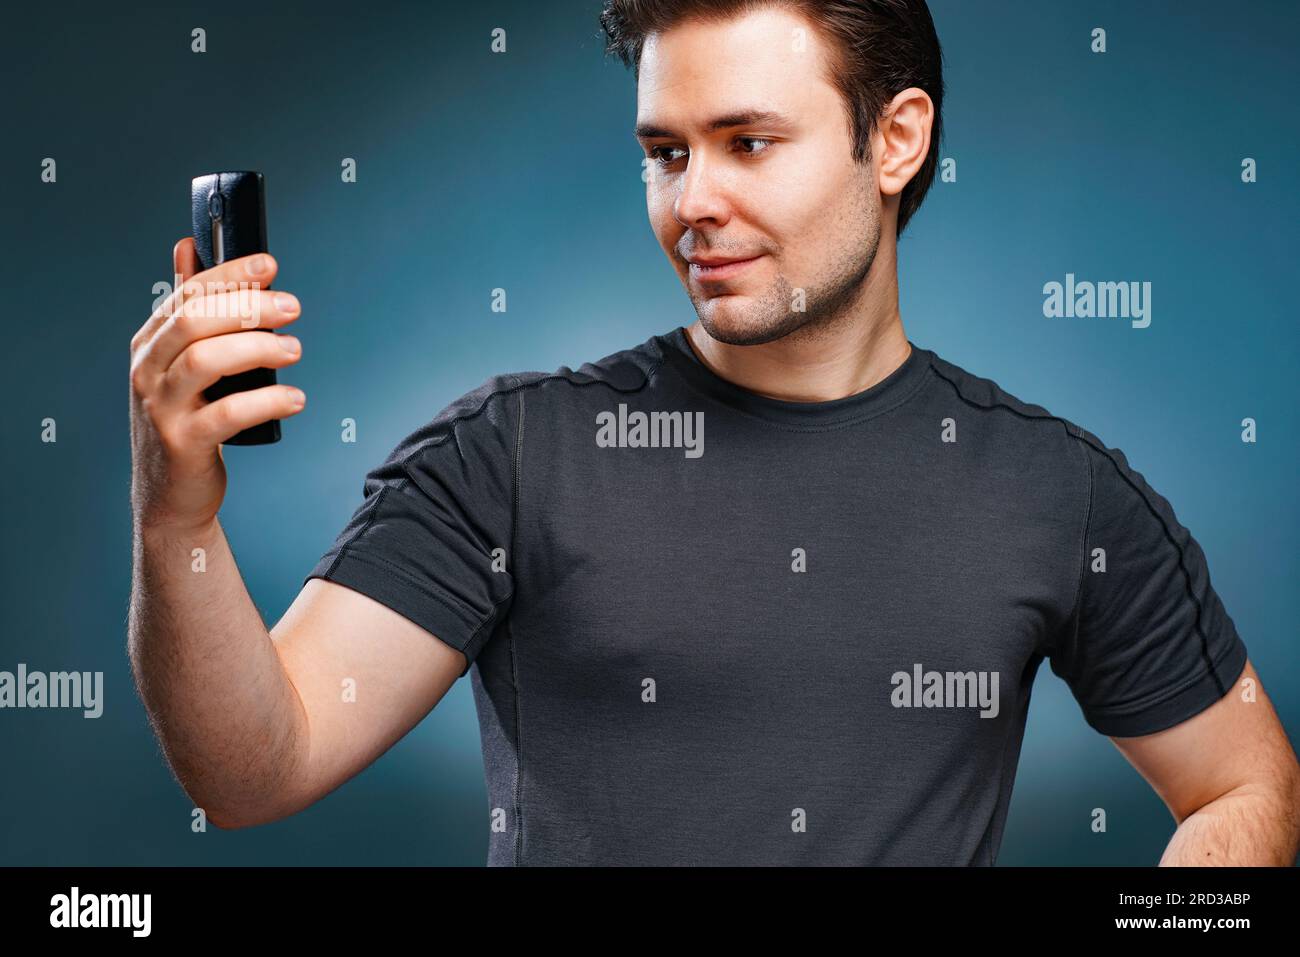 Young handsome man taking selfie portrait on gray wall background Stock Photo